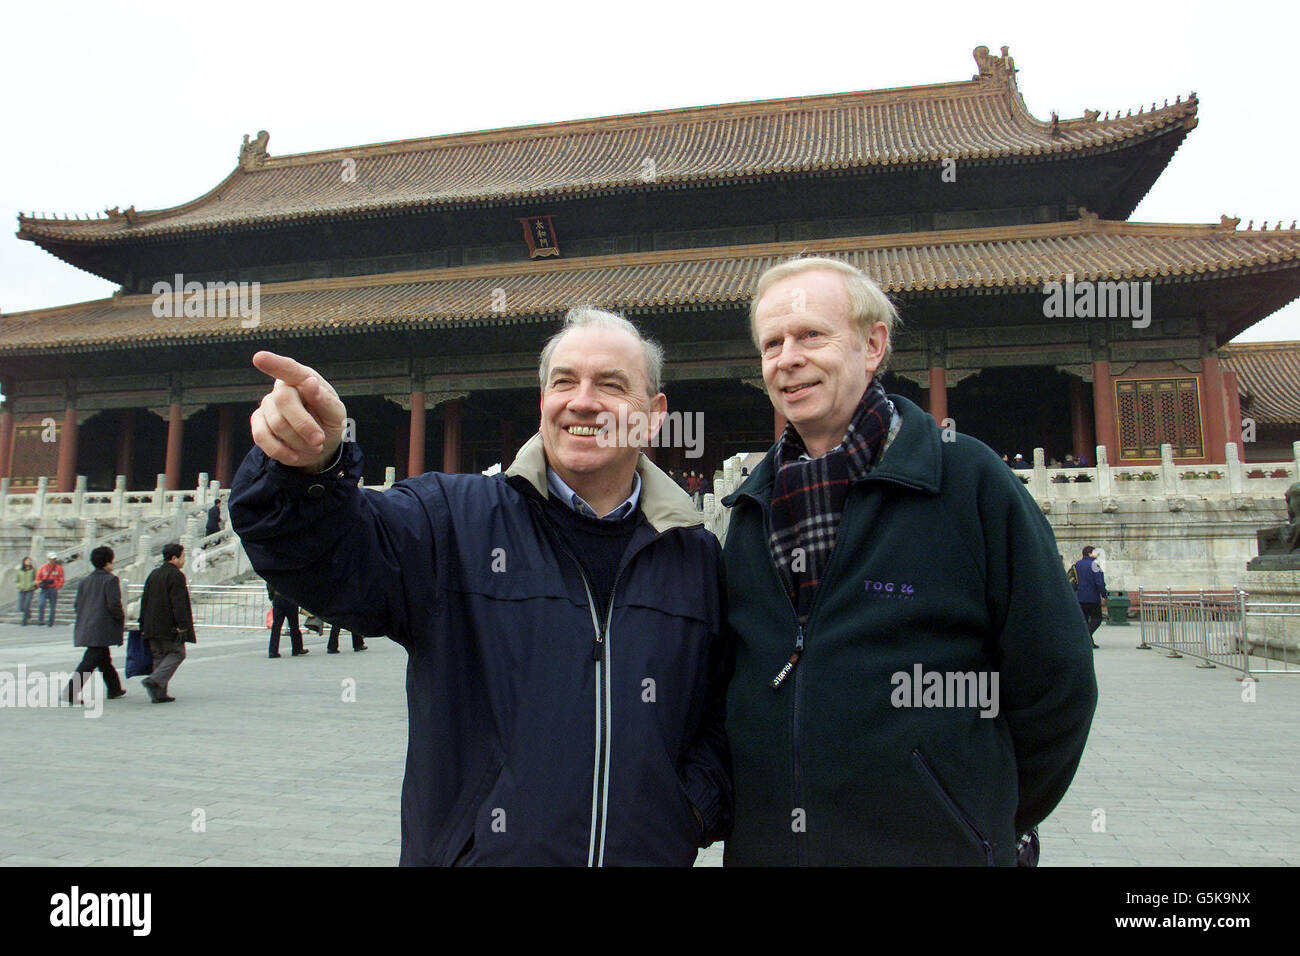 Johnathan Hegan a senior Partner with Kirk McClure and Morton, a Independent Engineering Consultancy Firm based in Belfast, with Sir Reg Empey (right) Enterprise Trade and Investment Minister for Northern Ireland, they met at the Forbidden city in Beijing, China. * at the start of a number of business meetings with Northern Ireland companies. Stock Photo